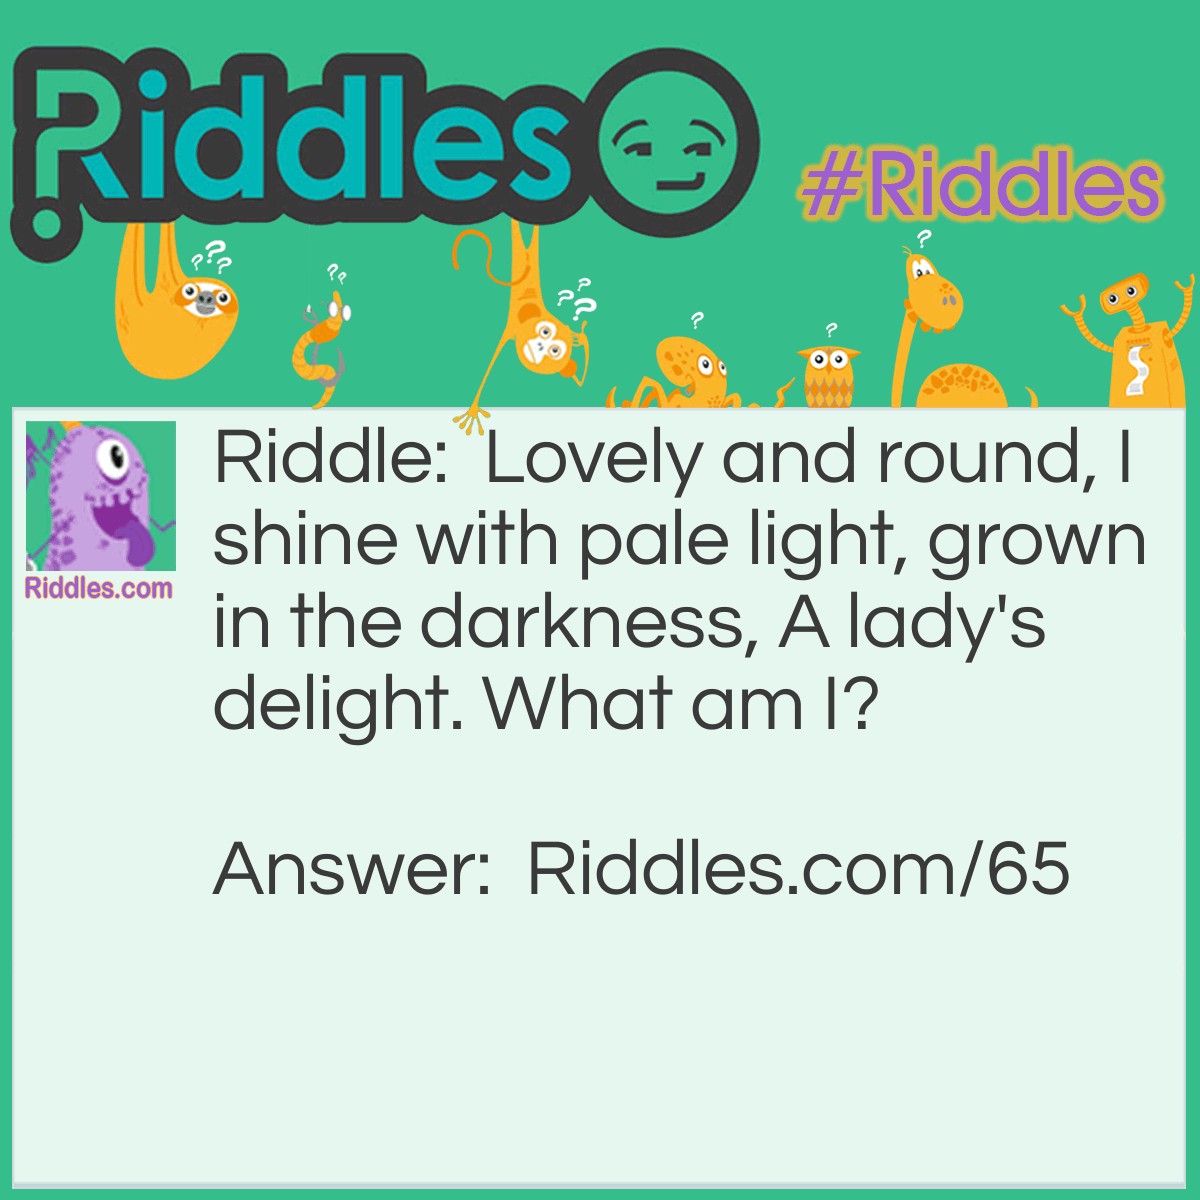 Riddle: Lovely and round, I shine with pale light, grown in the darkness, A lady's delight. What am I? Answer: A Pearl.